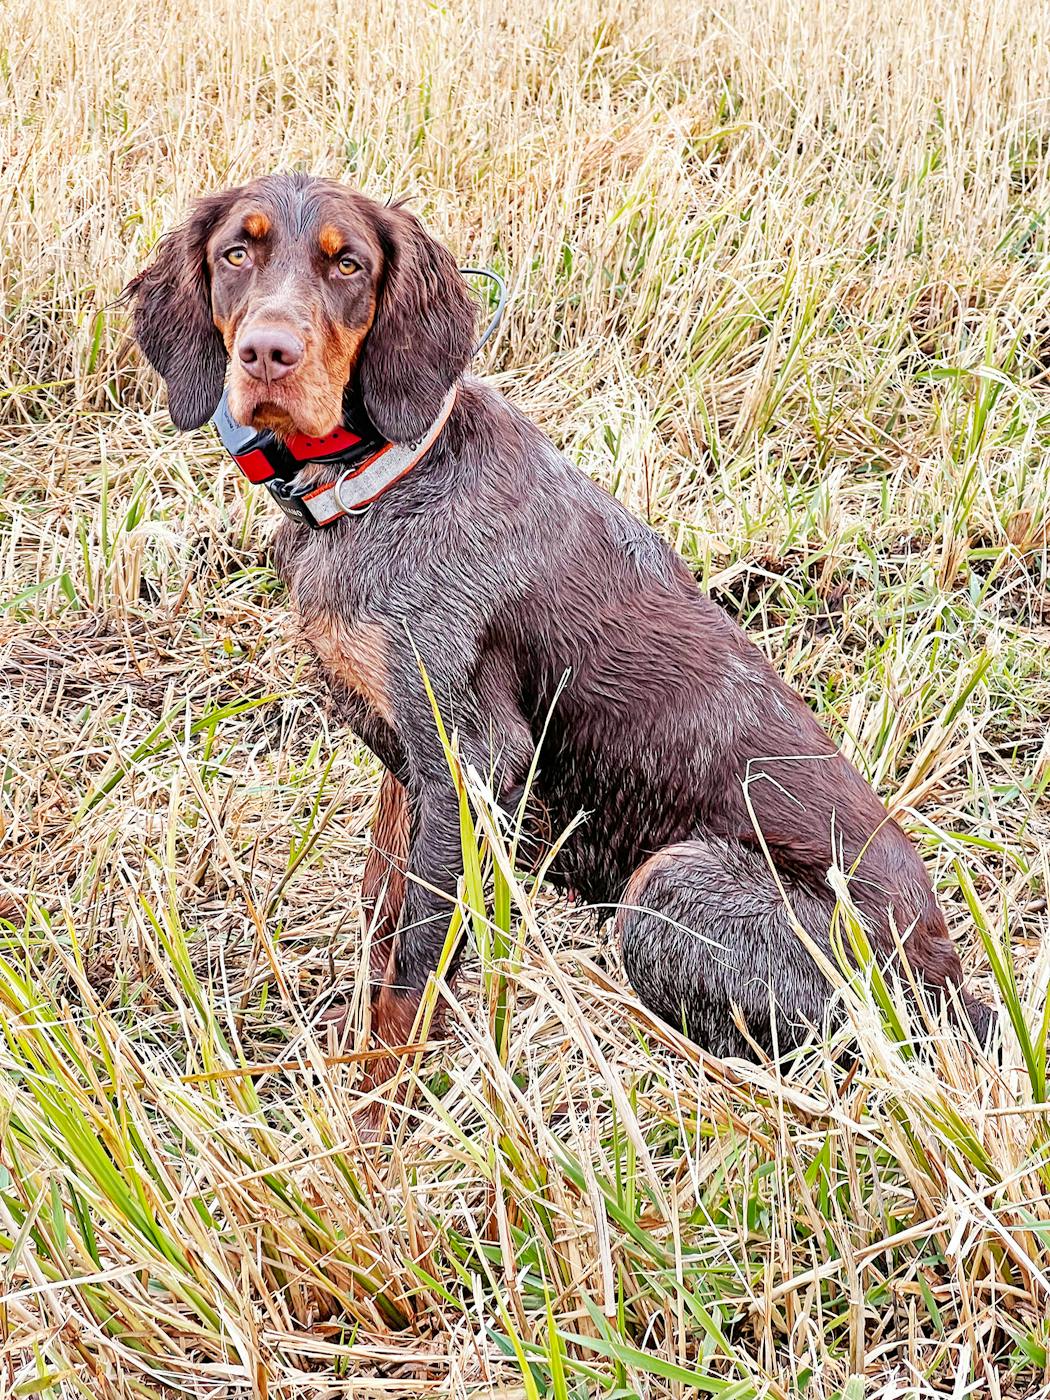 Madie, a Picardy spaniel owned by Kenny and Beth Reed, takes a break while hunting pheasants Saturday morning in Pine County, where the Reeds have done extensive habitat work 80 wildlife-friendly acres.